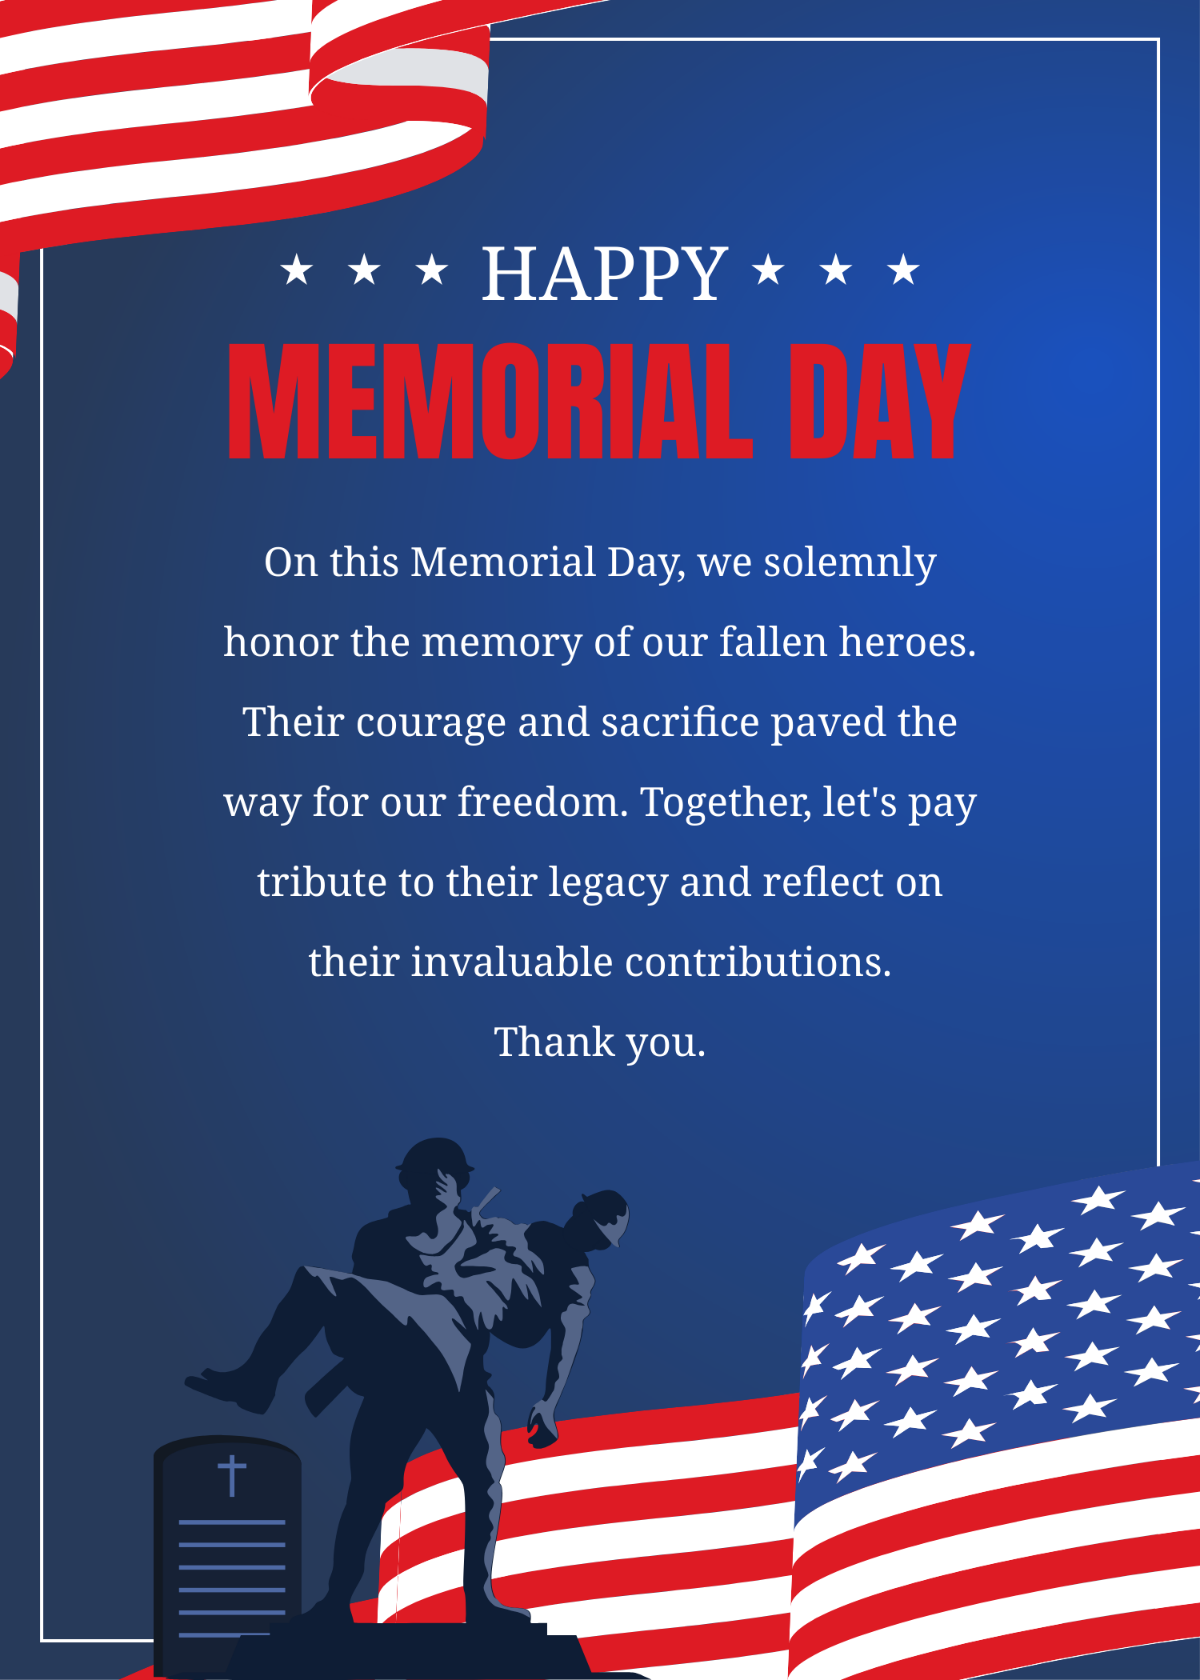 Memorial Day Message to Customer